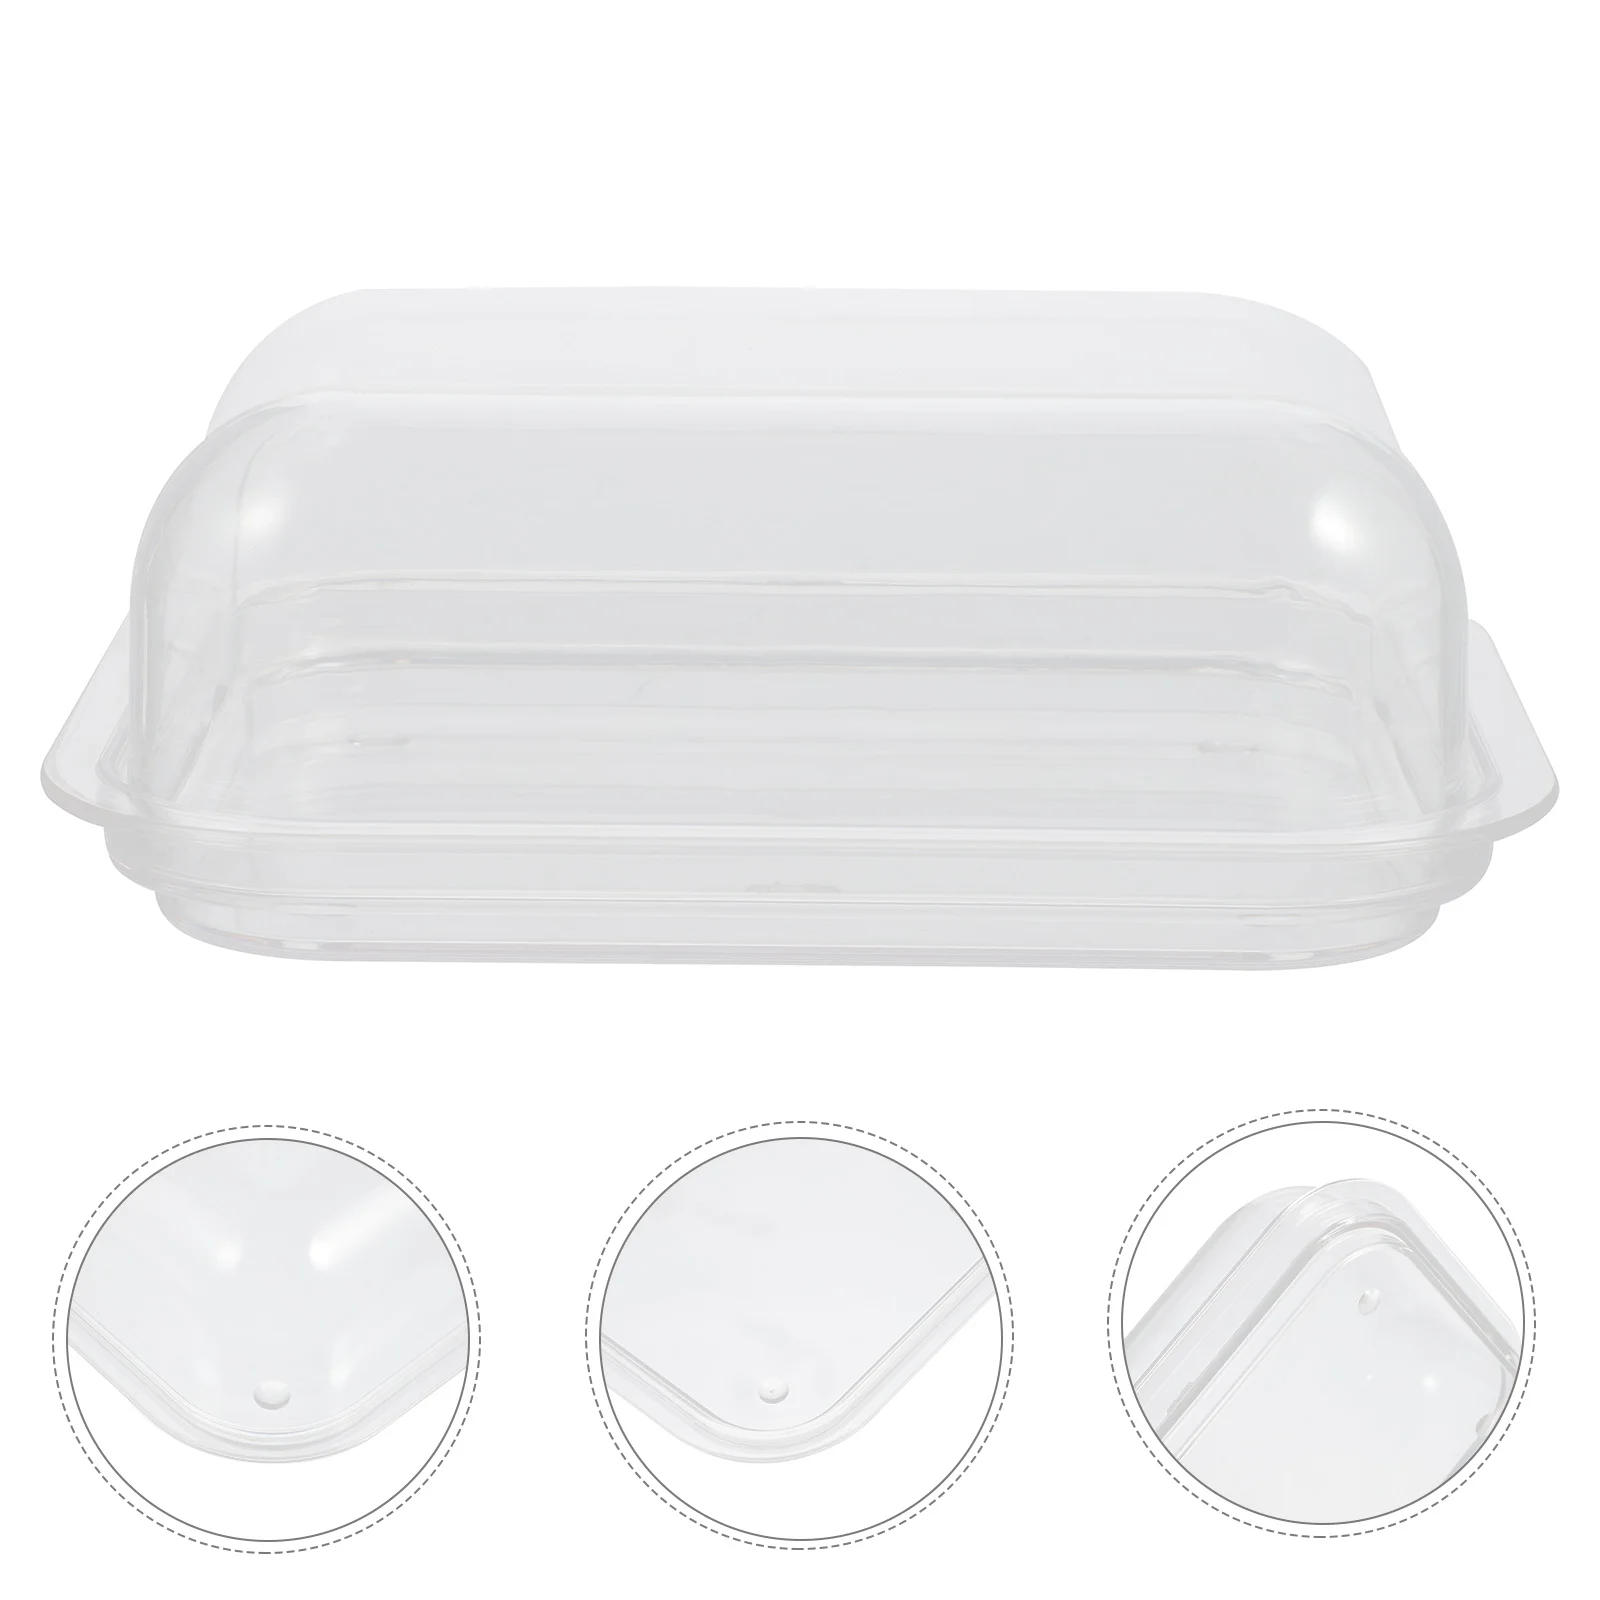 

Butter Lid Bread Container Dish Holder Box Storage Large Rectangular Handle Refrigerator Covers Keeper Dishes Cake Countertop